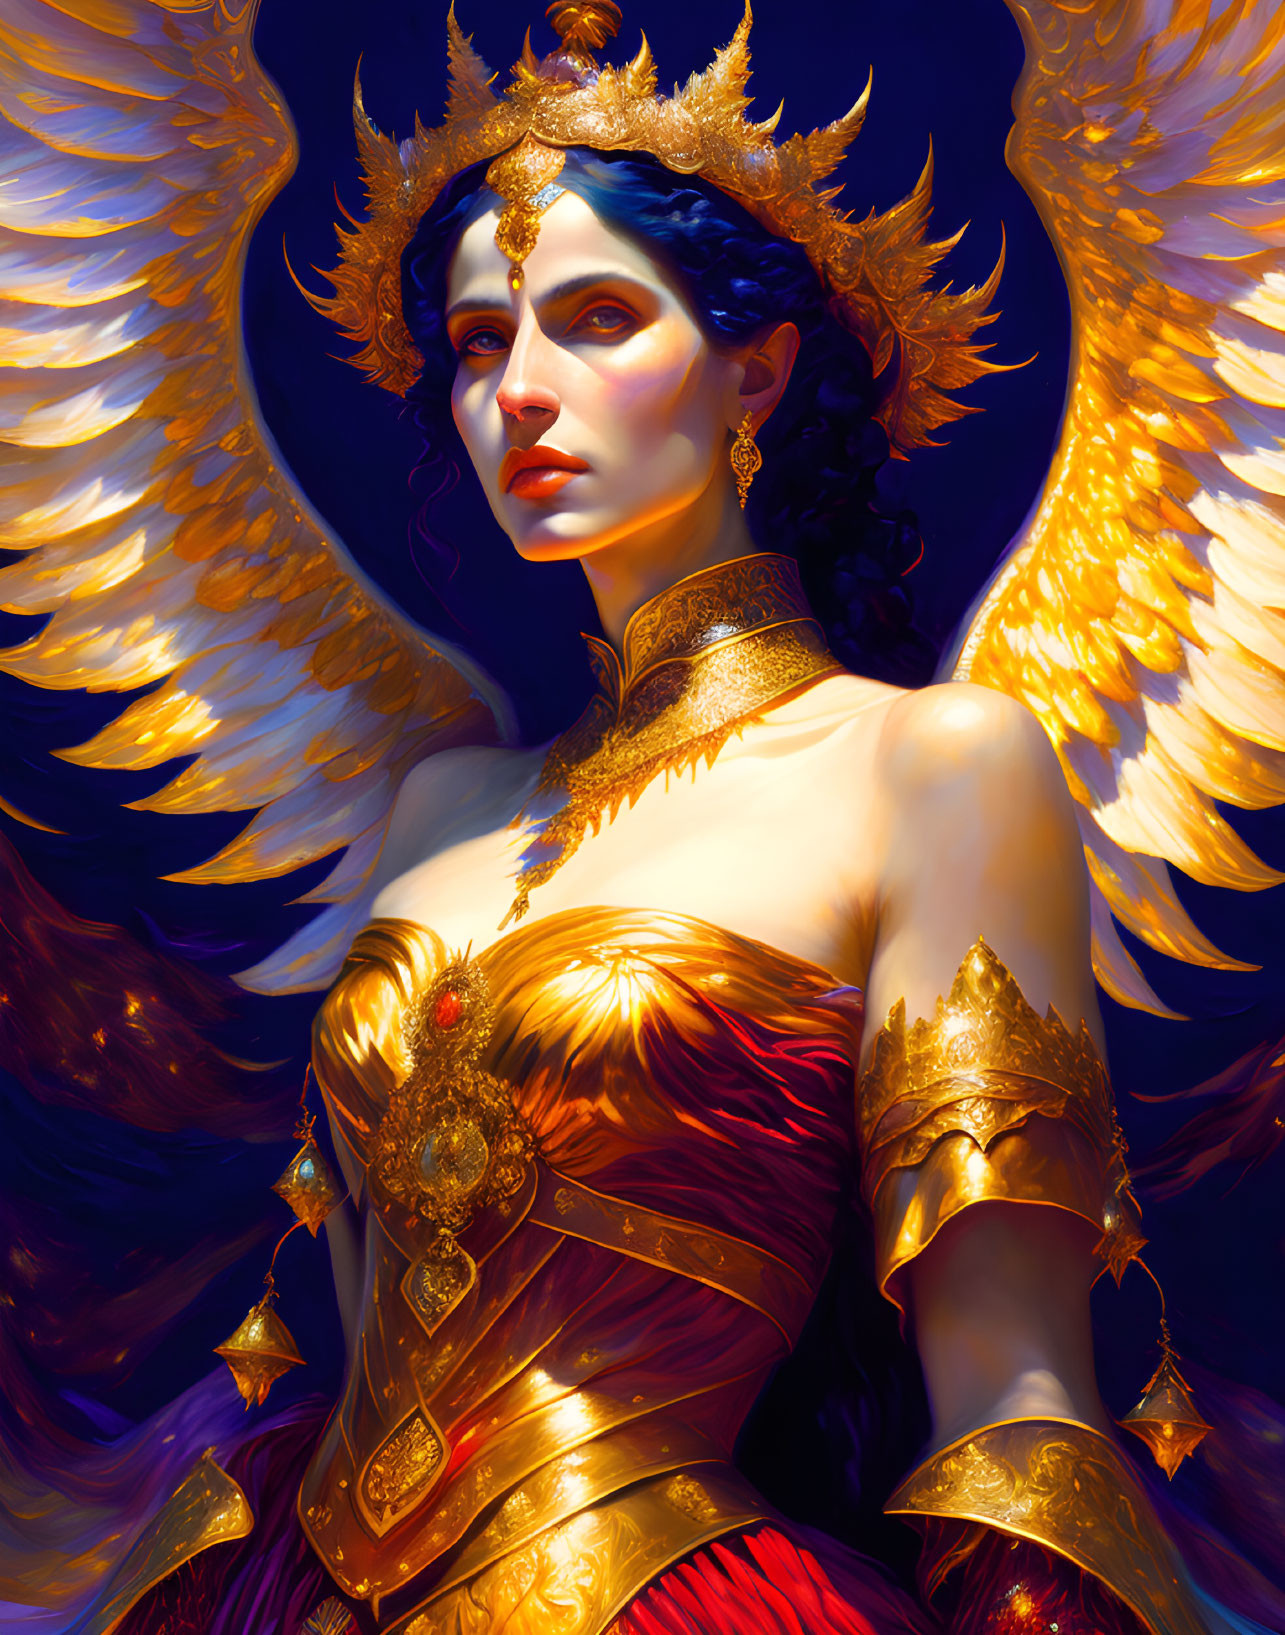 Regal woman with blue eyes, golden headpiece, red and gold attire, and luminous wings